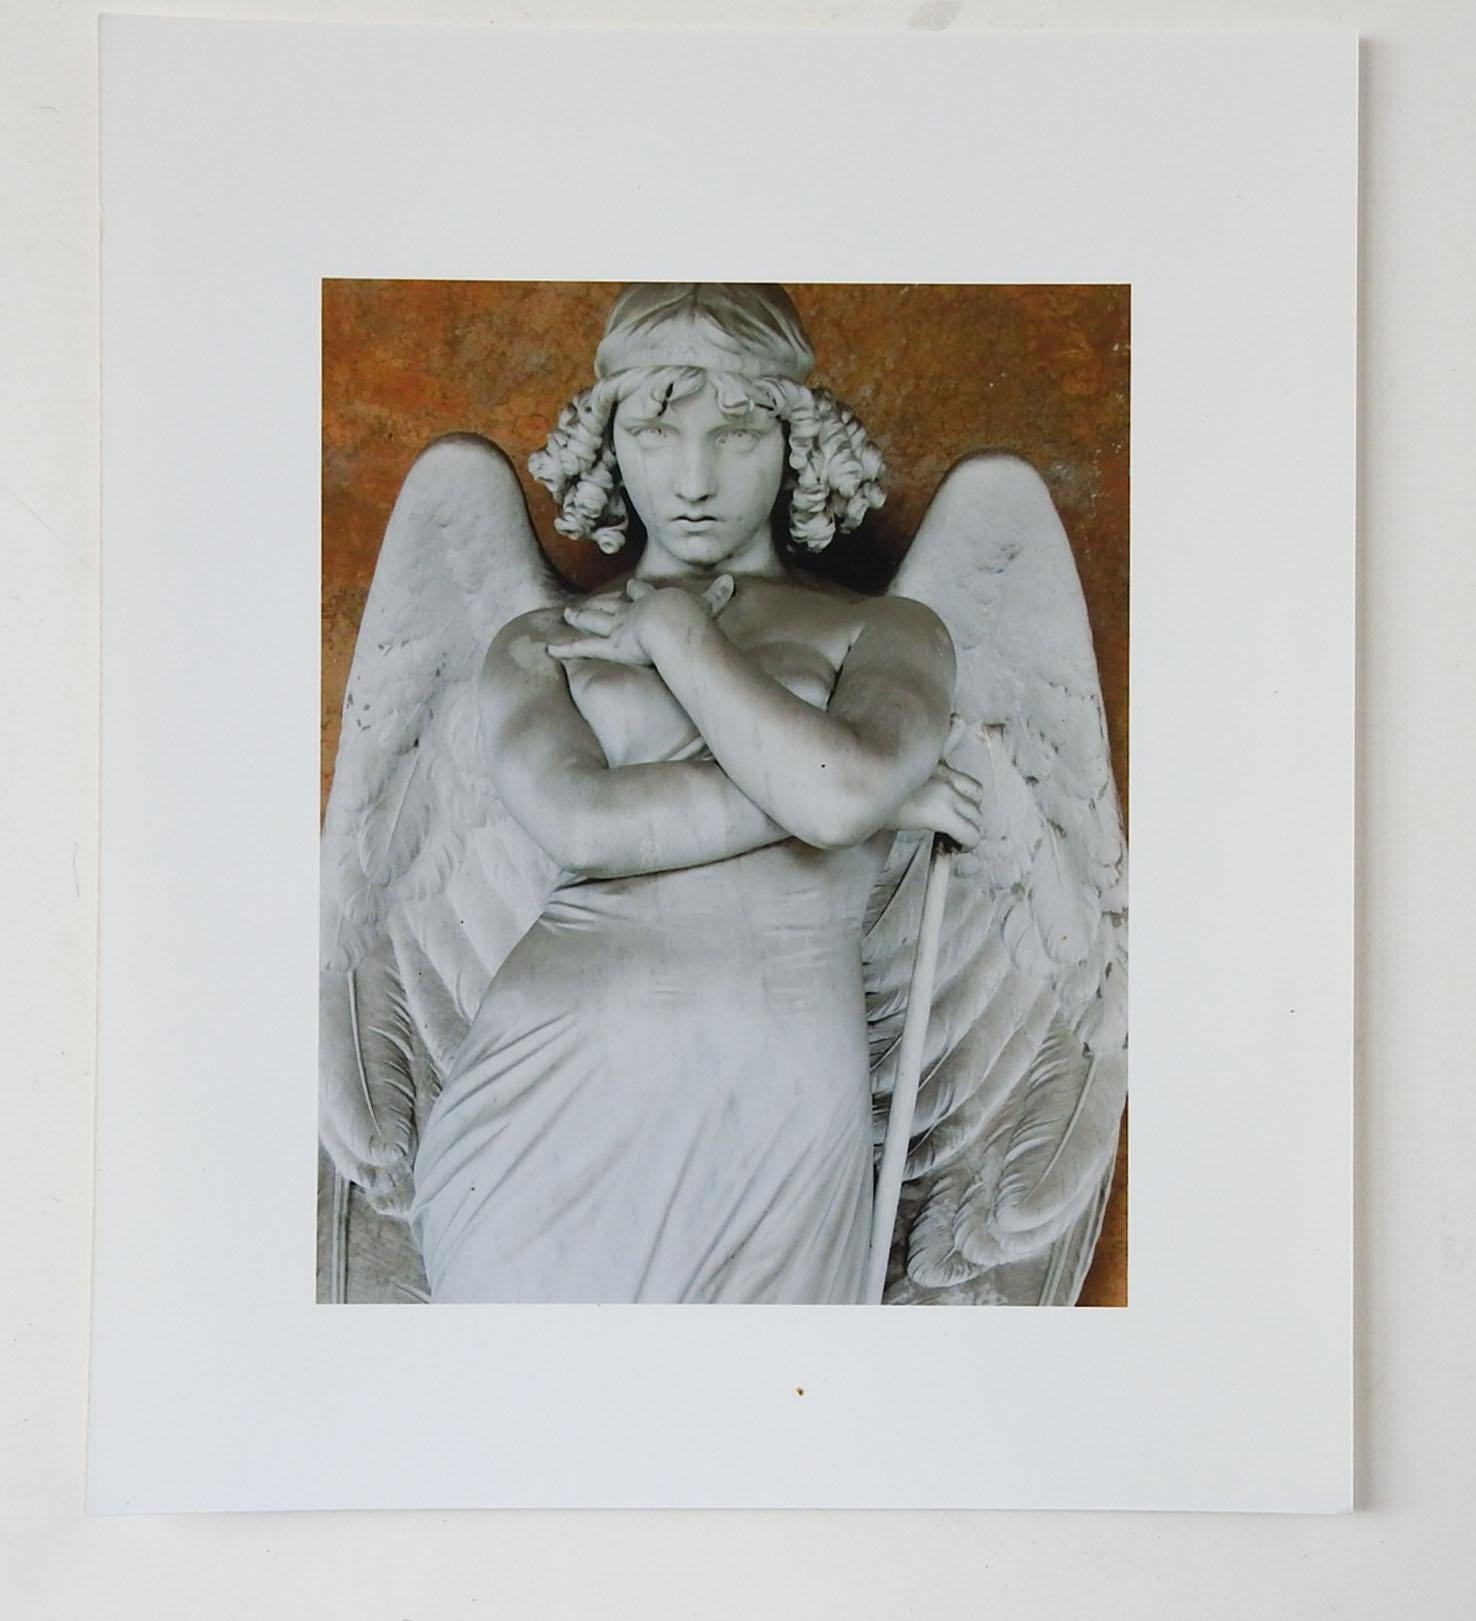 Vintage color photograph on paper by Eric C. Weller (20th century) Texas. Monteverde Angel sculpture. Unsigned, glossy finish, Eric Weller was a professor of photography at Texas State University, from the artists estate. Unframed.